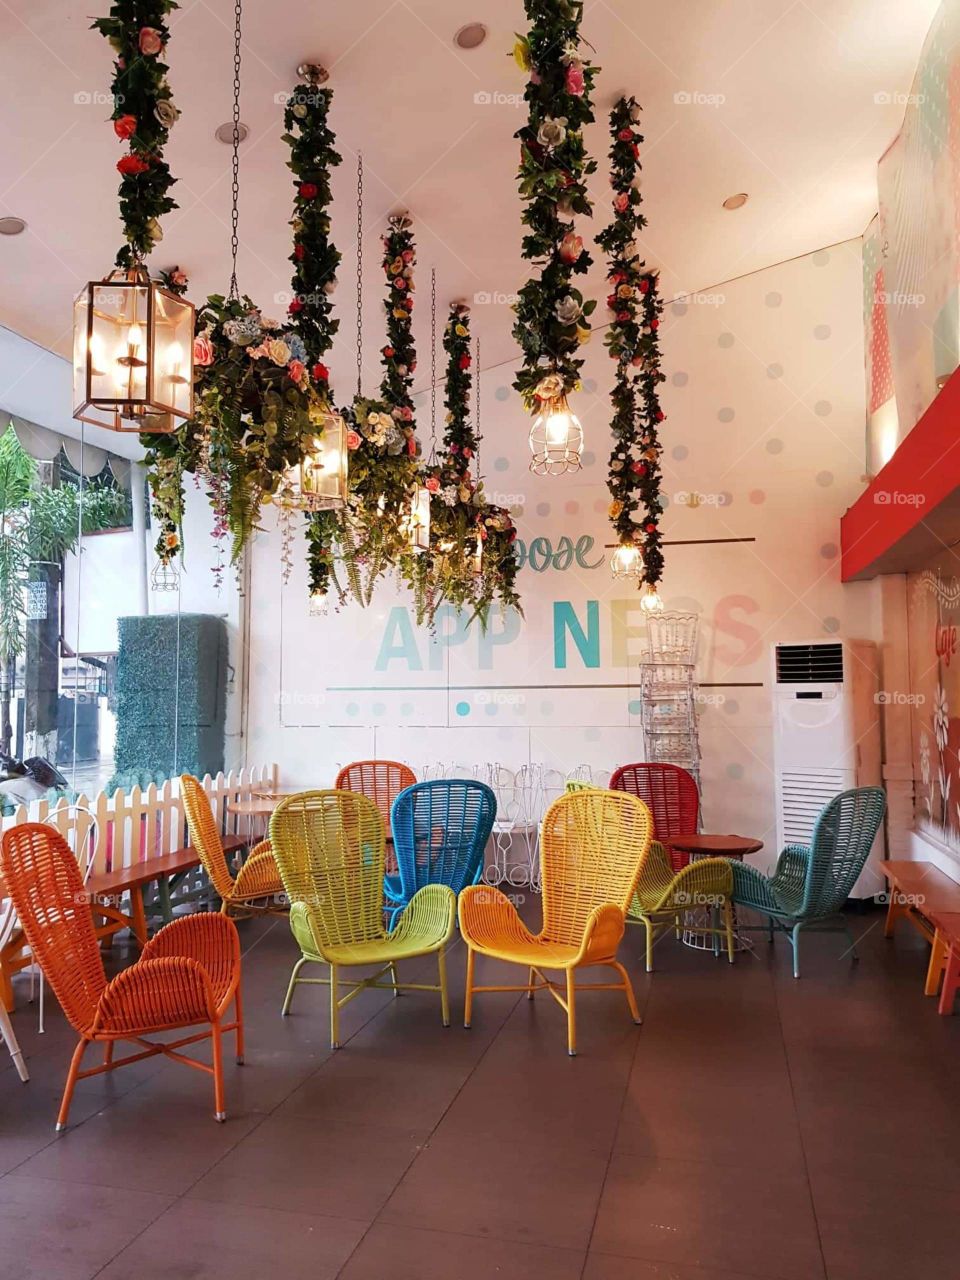 Delightful interior design of a resto with its colorful and comfy chairs.